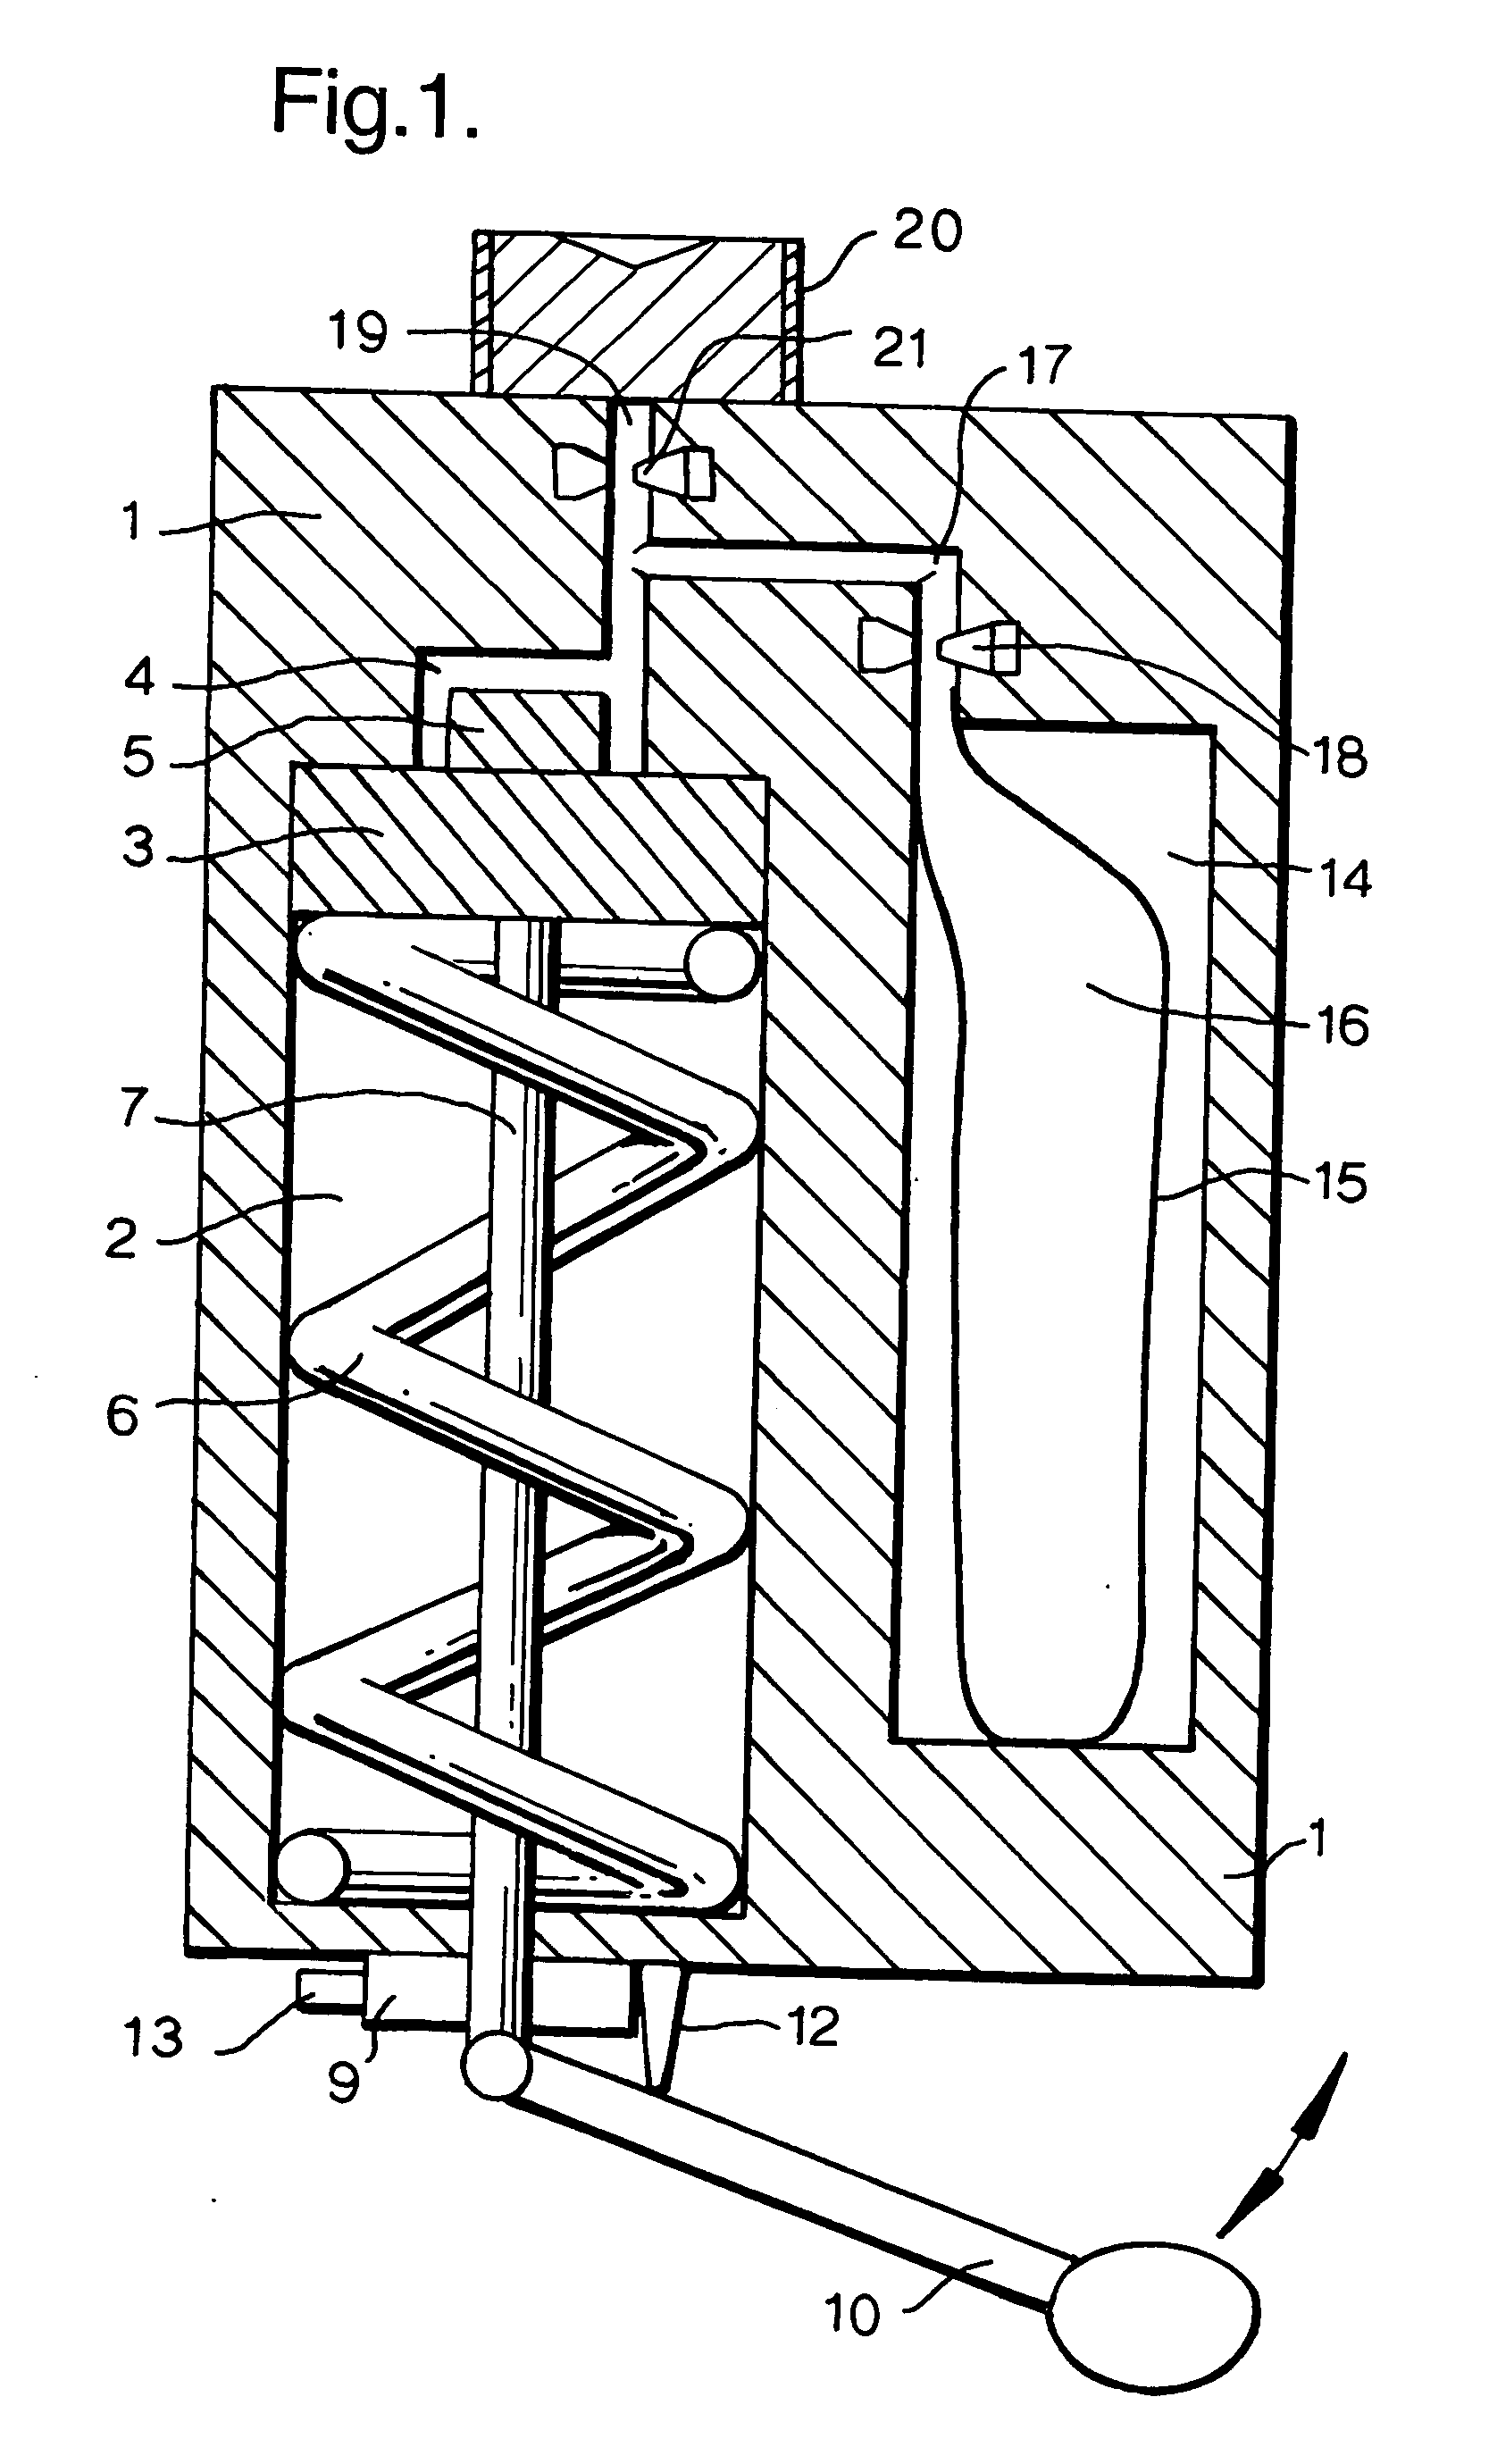 Method of creating a cosmetic spray